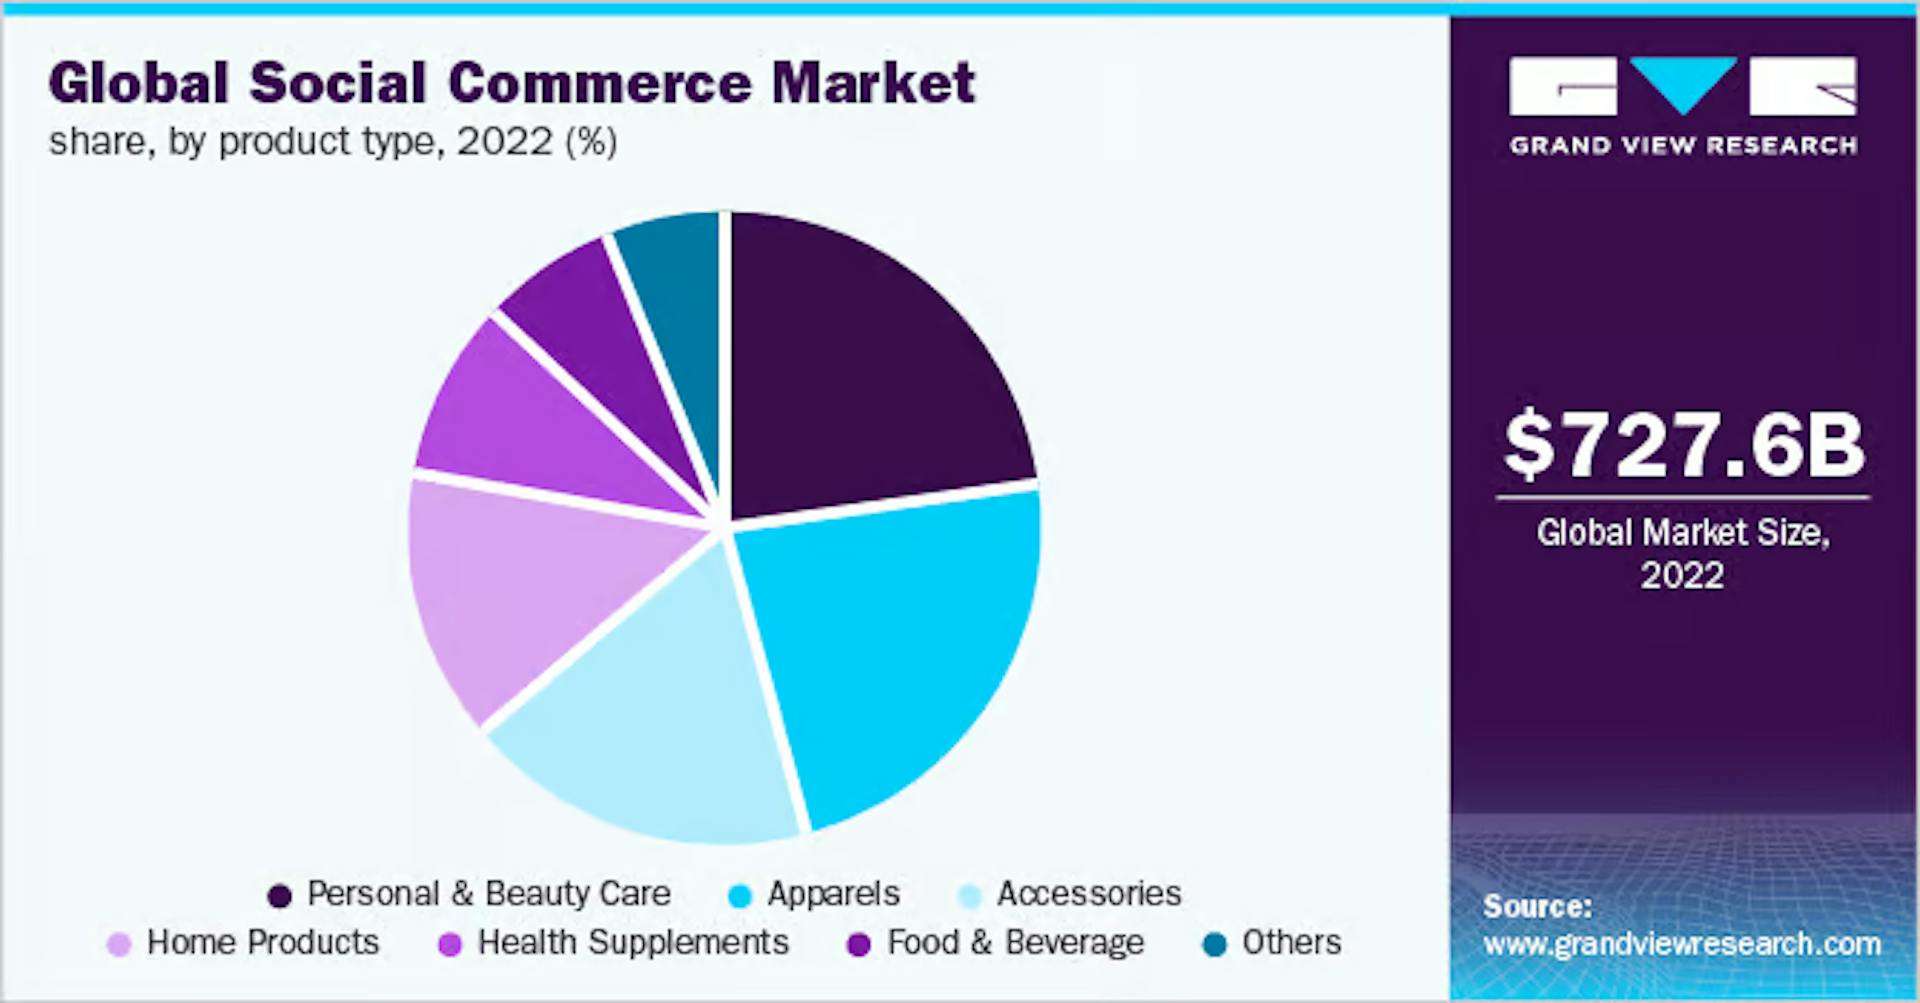 Crédit : Grand View Research, 2022